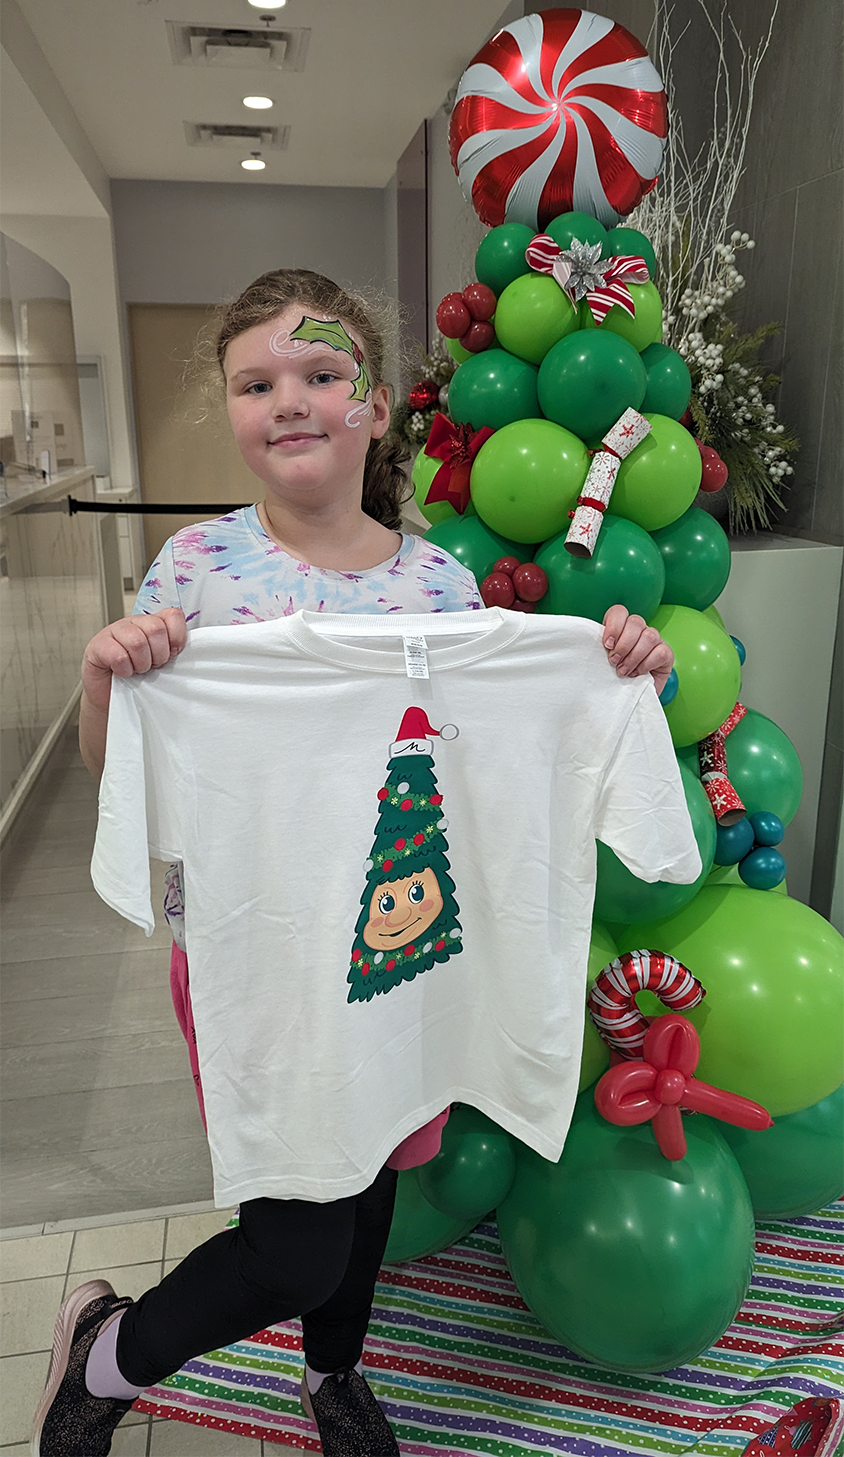 A young girl with a painted Christmas holly on her face holds a white T-shirt with Woody the Talking Christmas Tree on the front of it. She stands in front of a balloon Christmas tree.